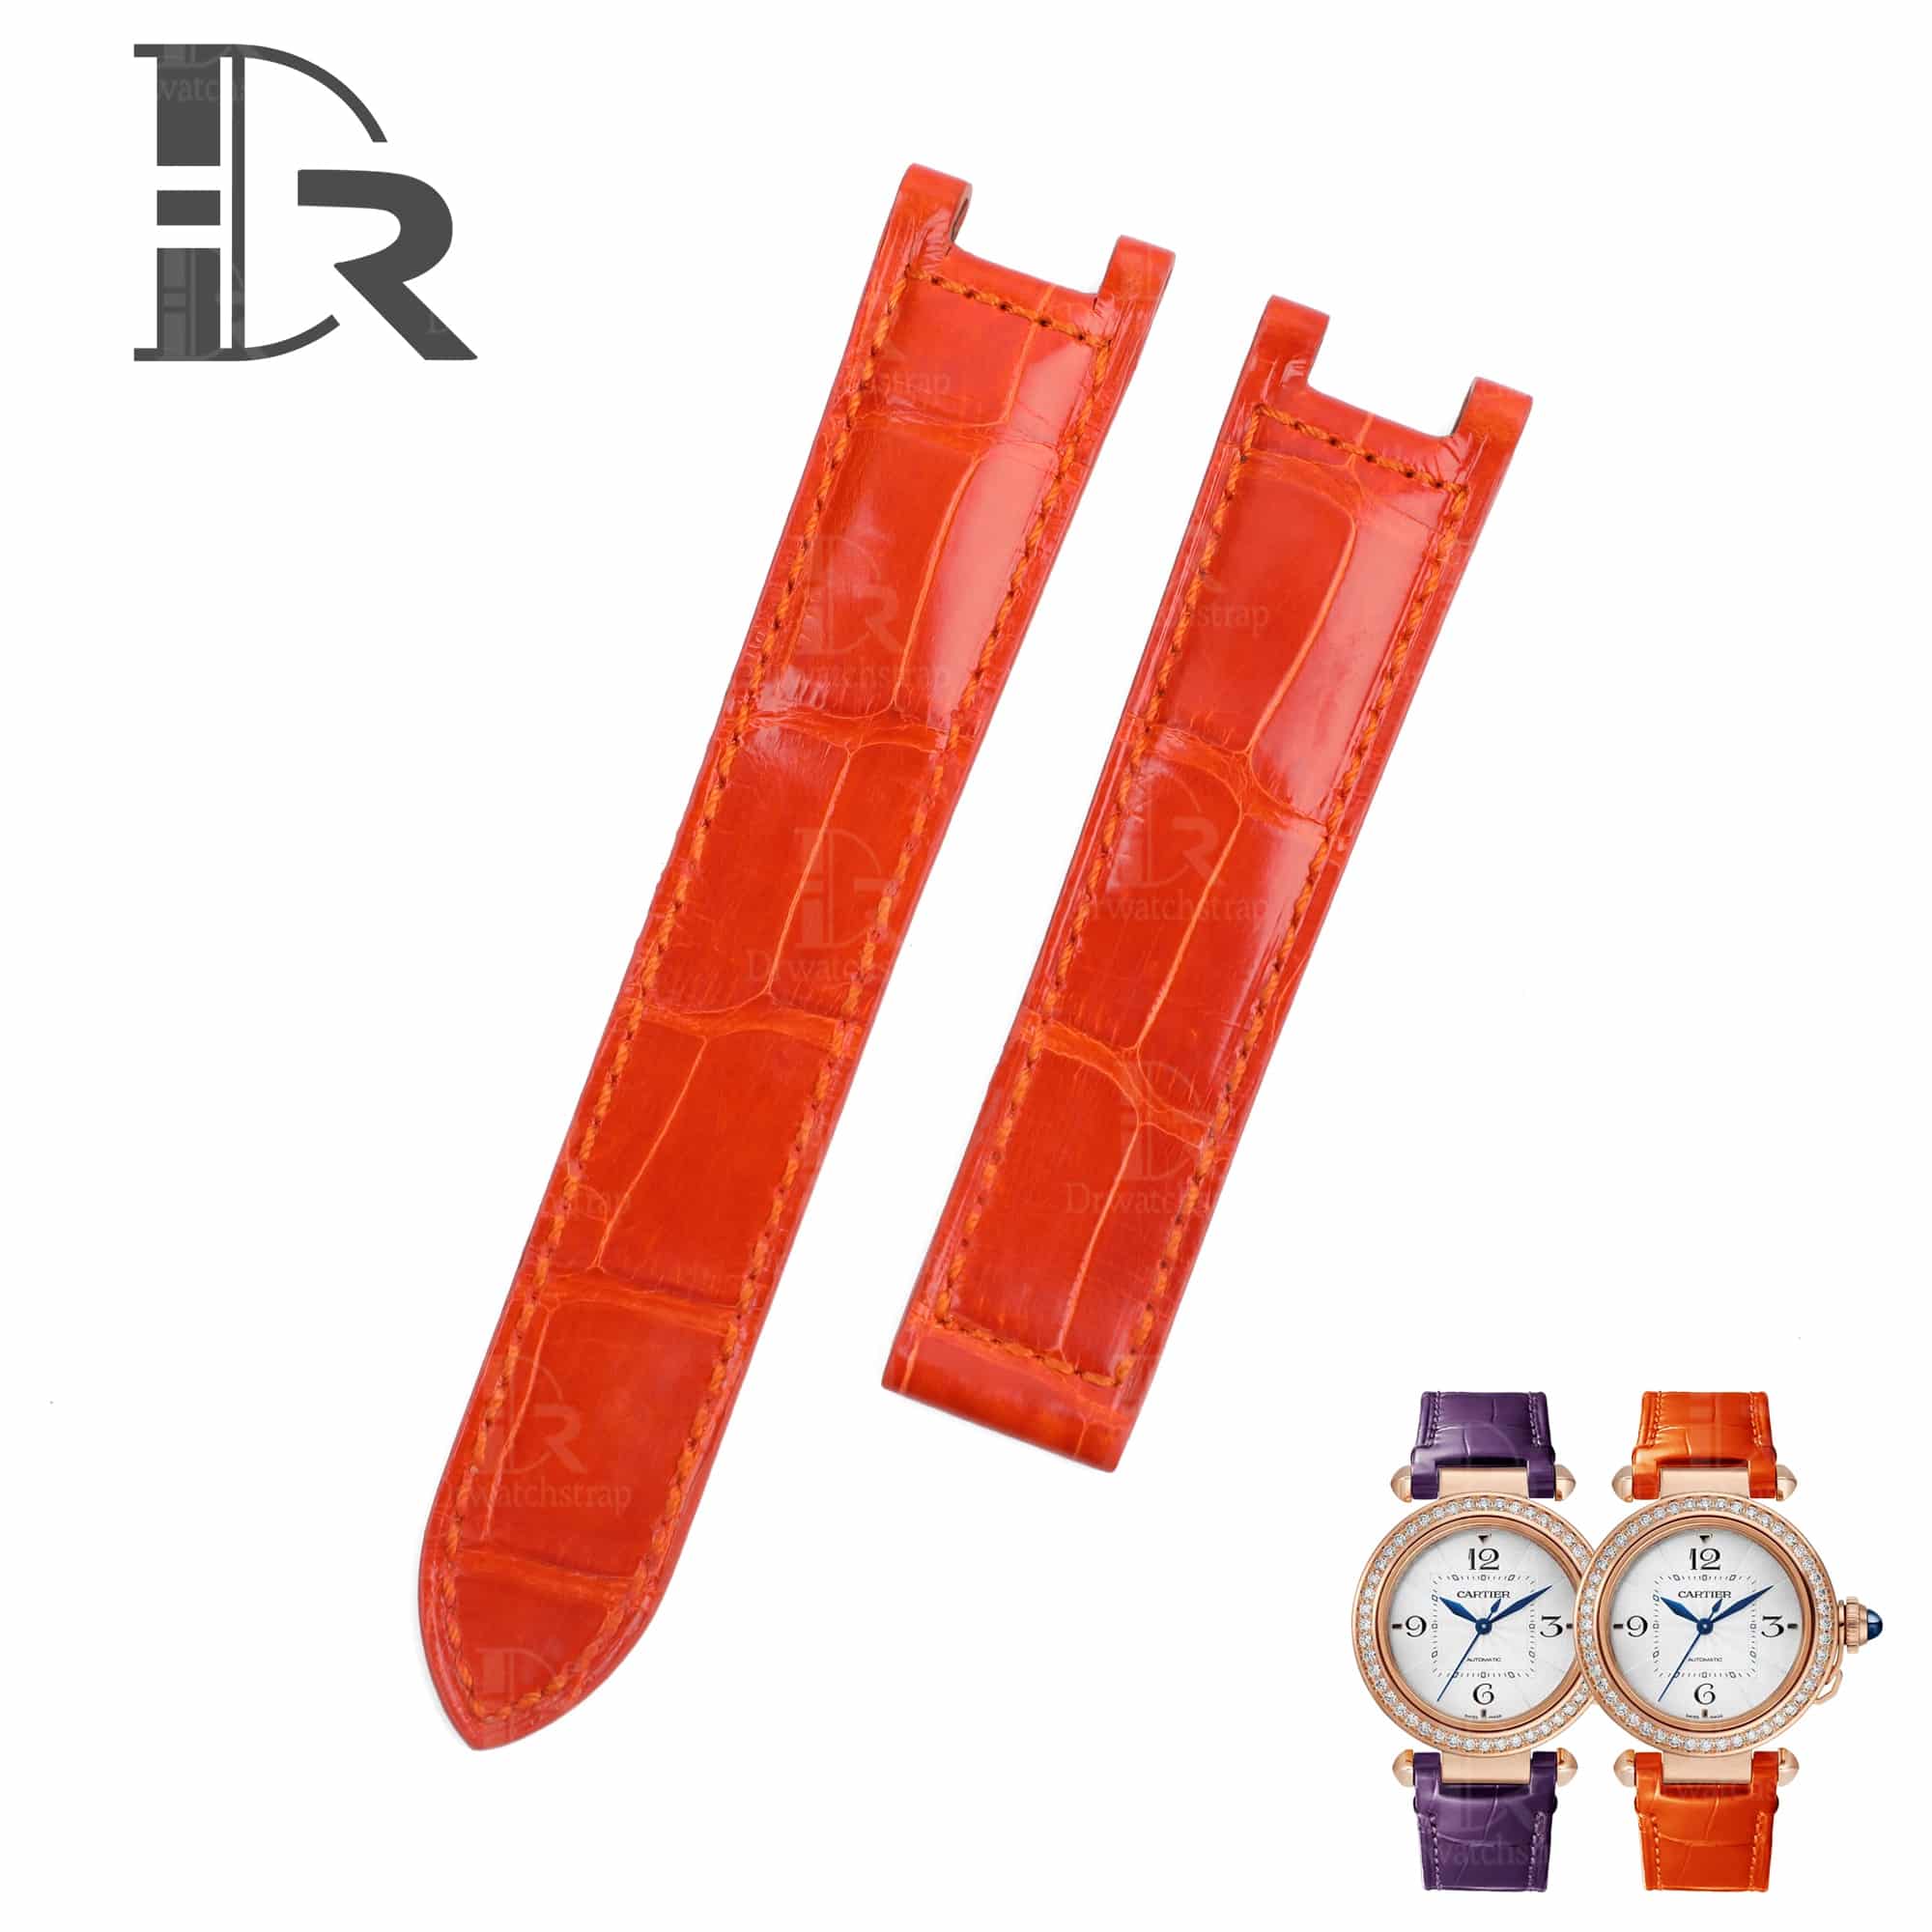 Genuine best quality American Alligator Orange leather watch strap and watch band replacement for Cartier De Pasha watches from DR Watchstrap - Shop the 100% handmade crocodile leather straps and watchbands online at a low price